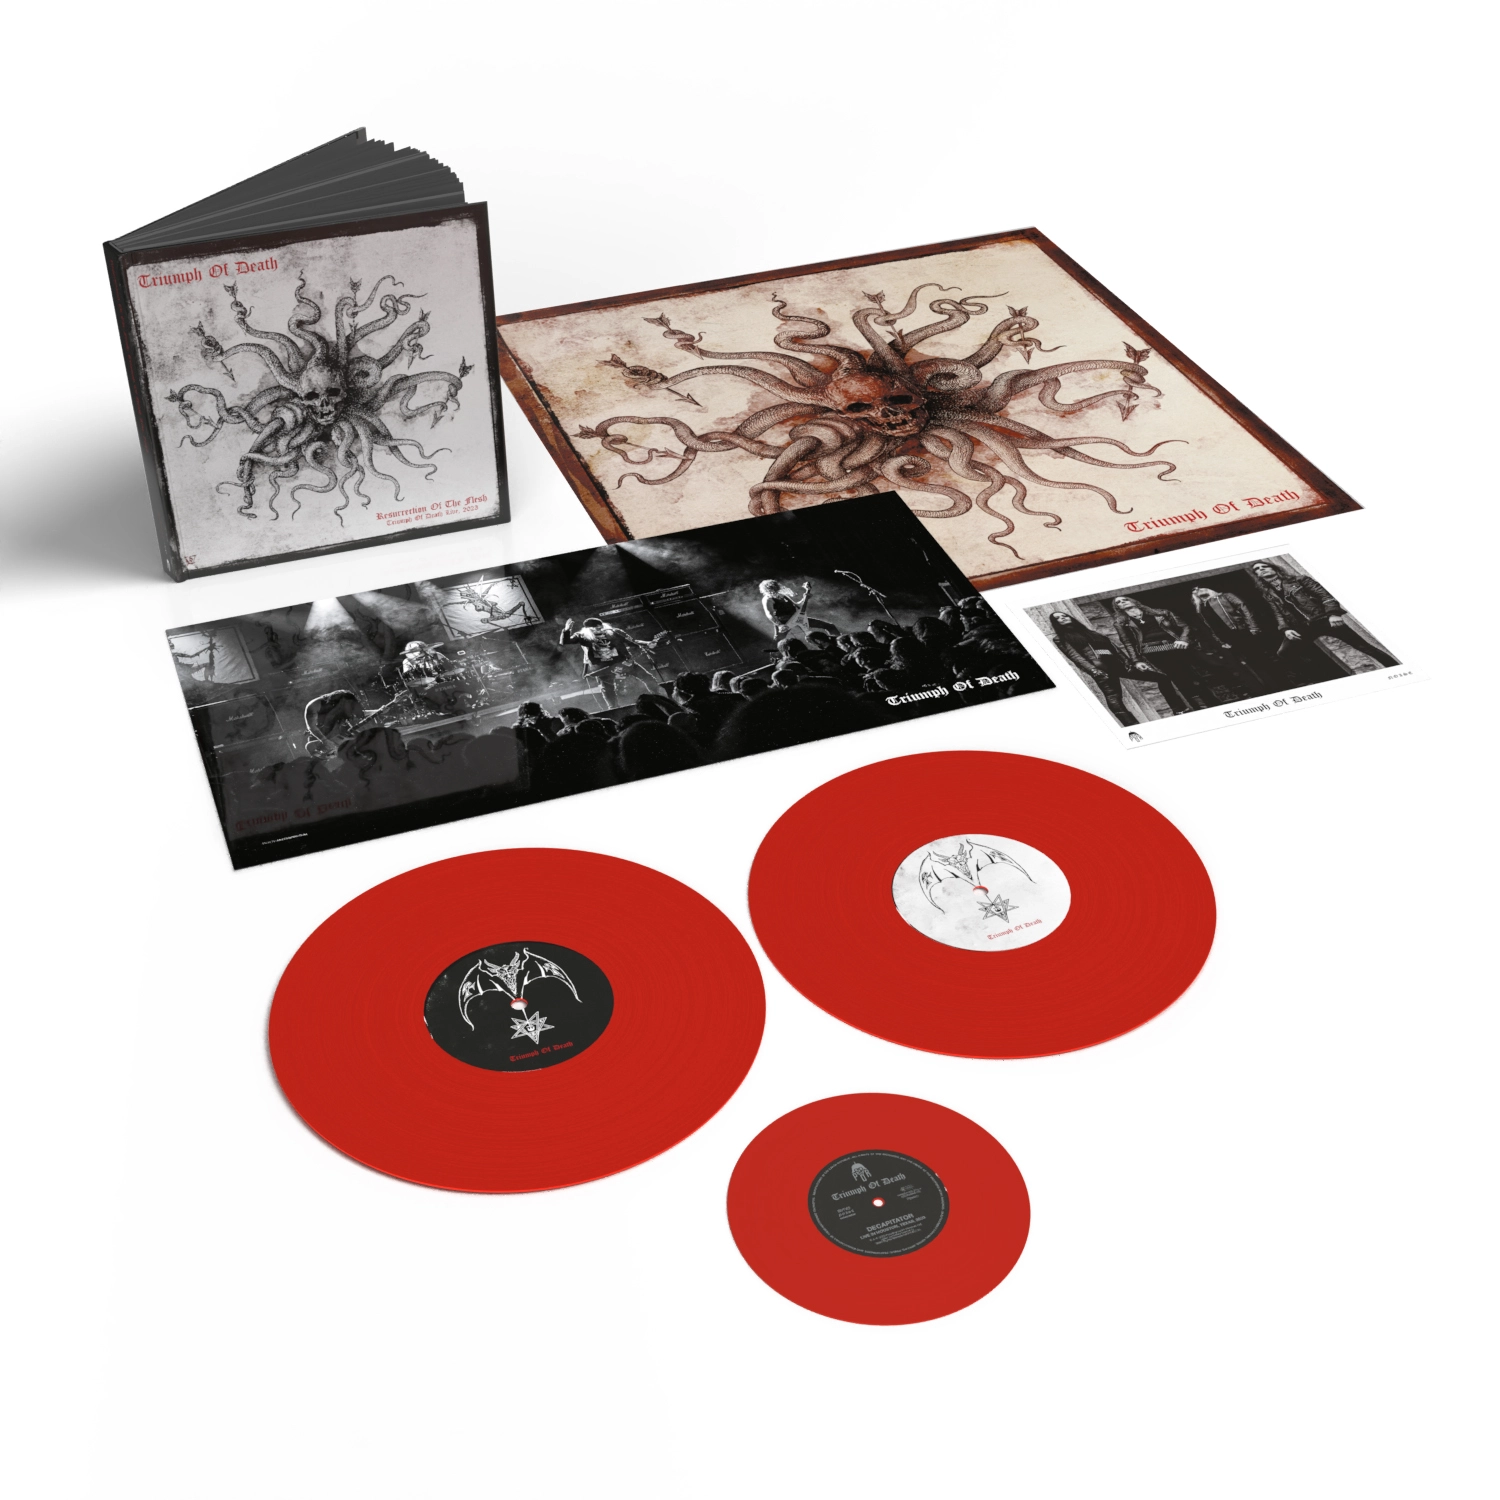 TRIUMPH OF DEATH - Resurrection Of The Flesh [RED DLP + 7" DELUXE BOOKPACK]